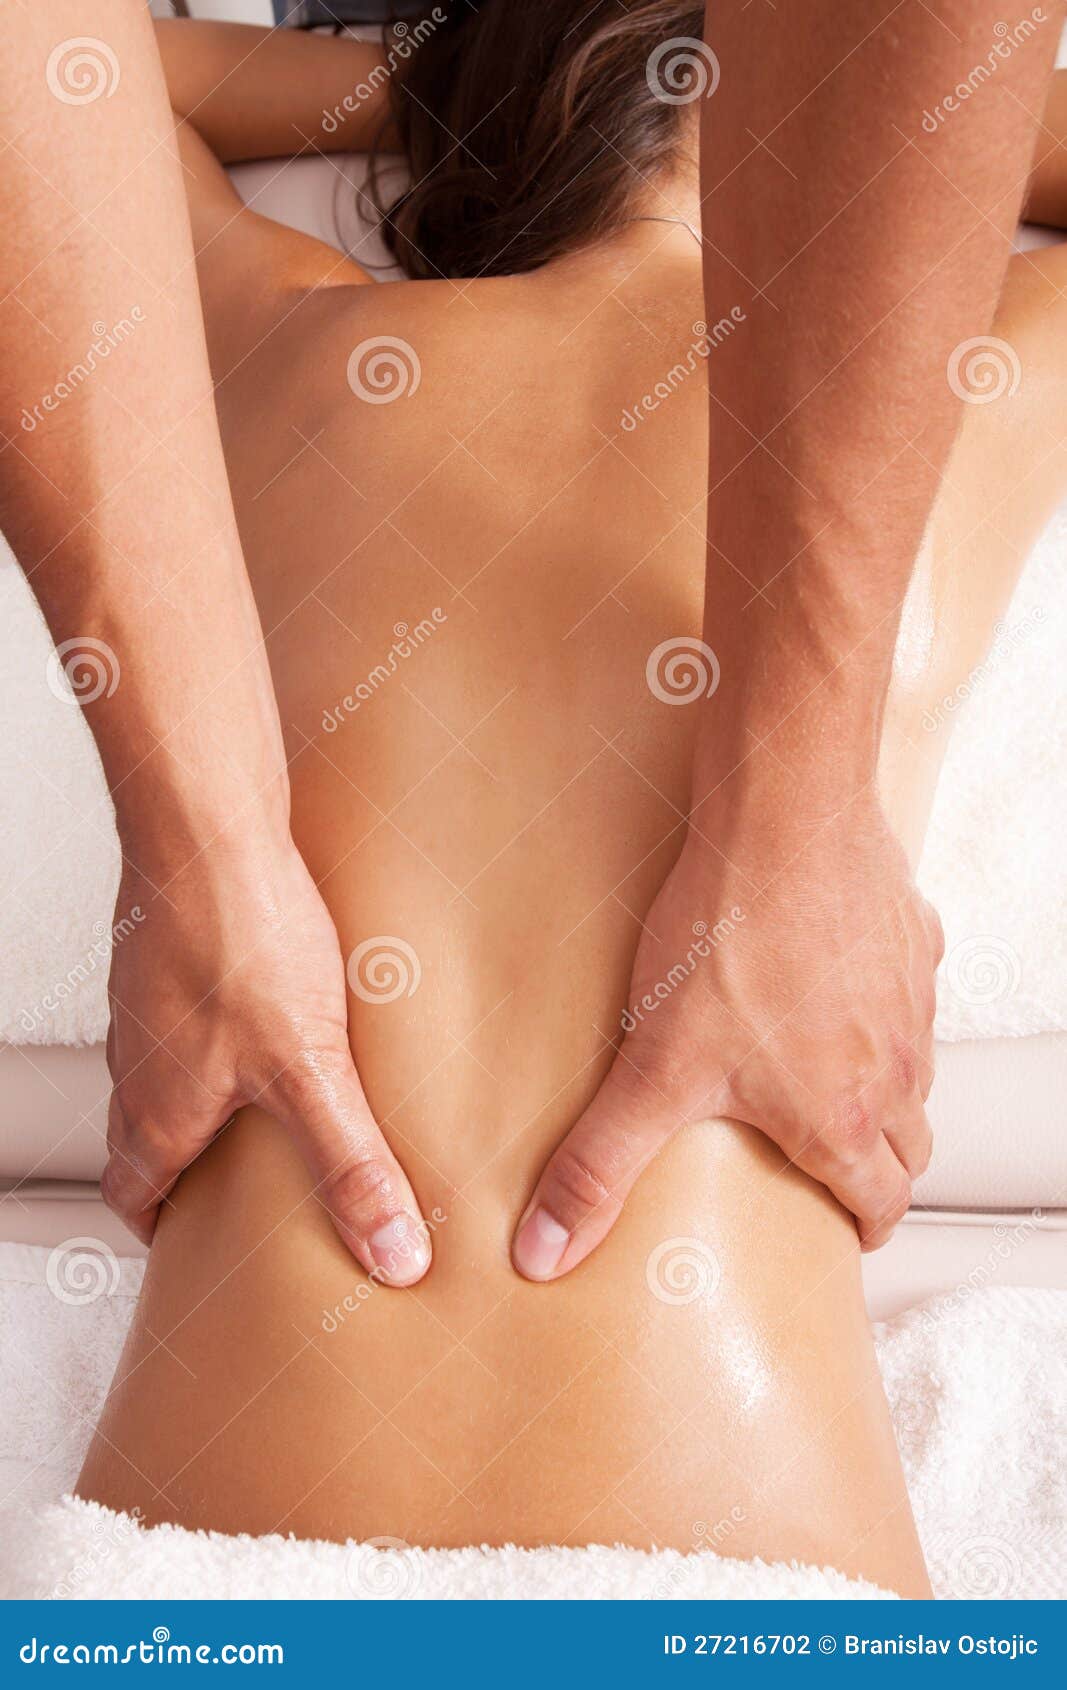 Lower back massage - Stock Image - C022/3243 - Science Photo Library